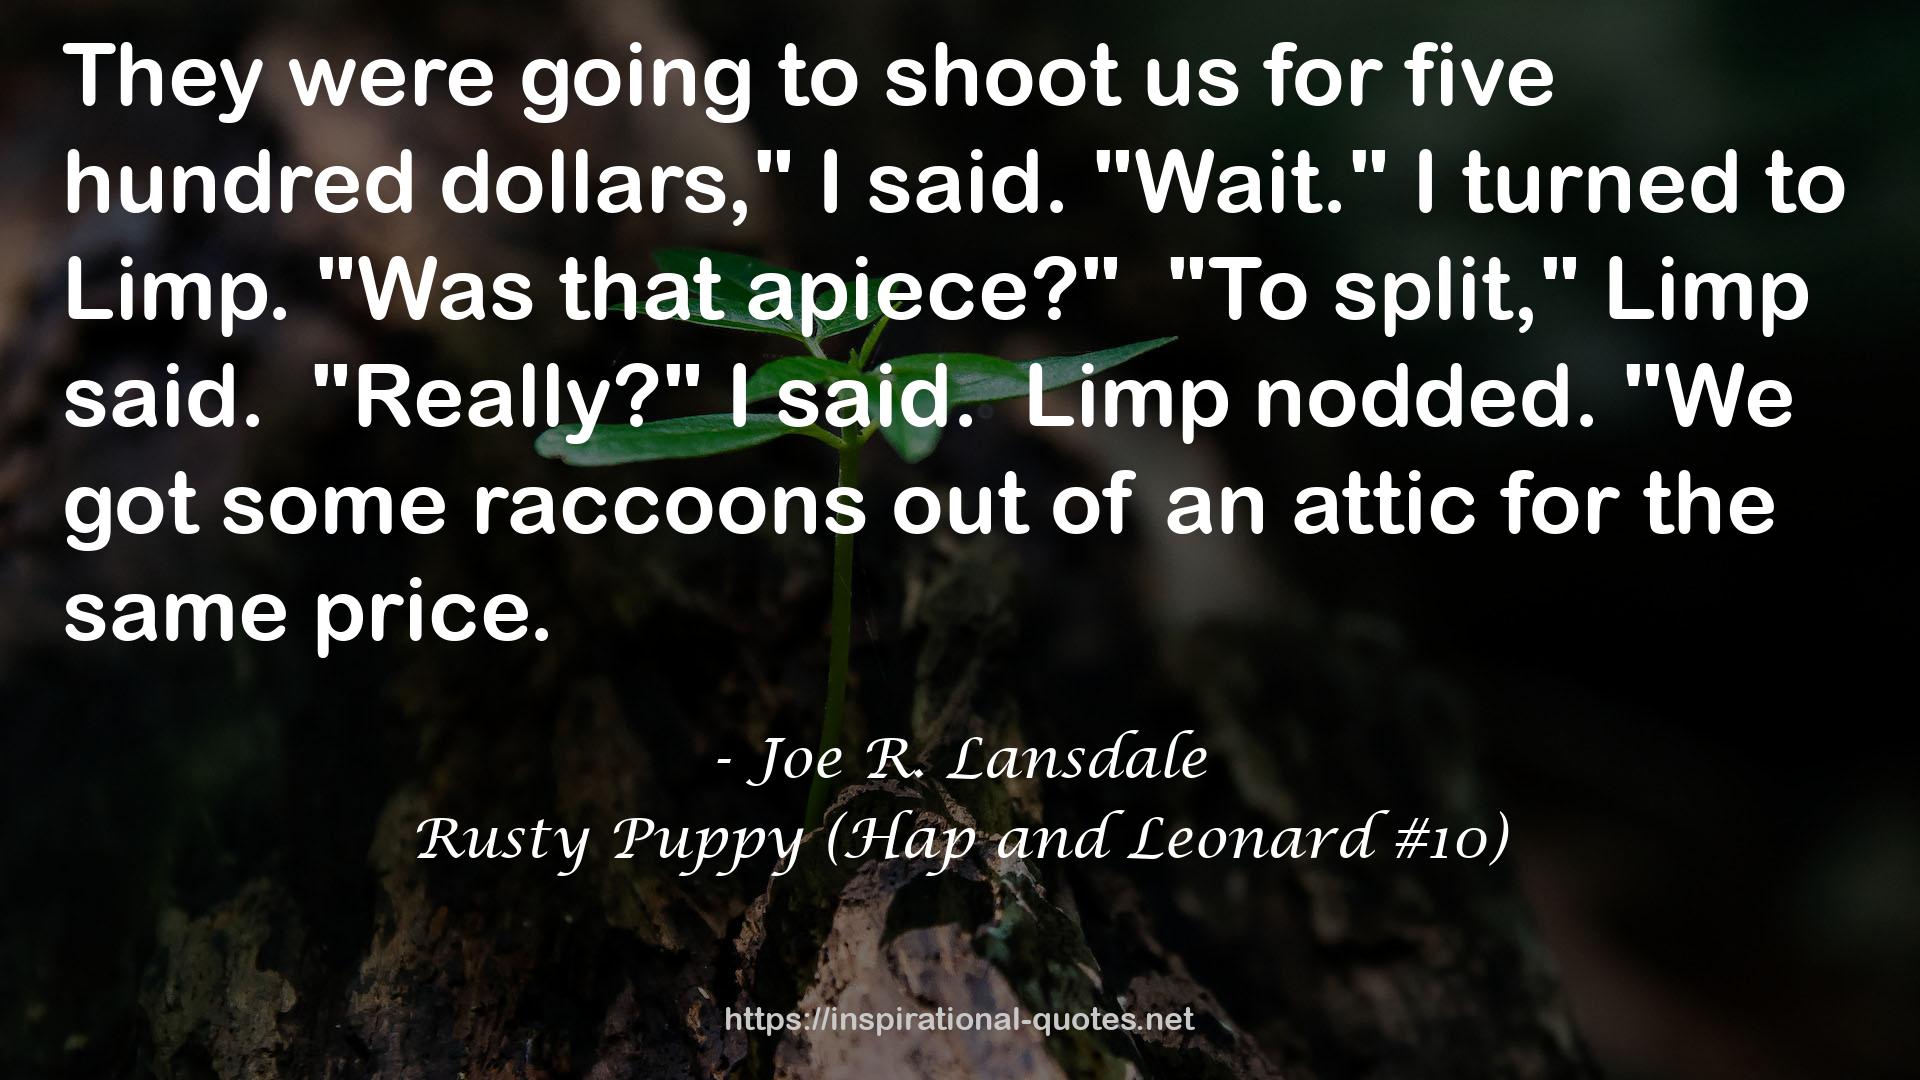 Rusty Puppy (Hap and Leonard #10) QUOTES